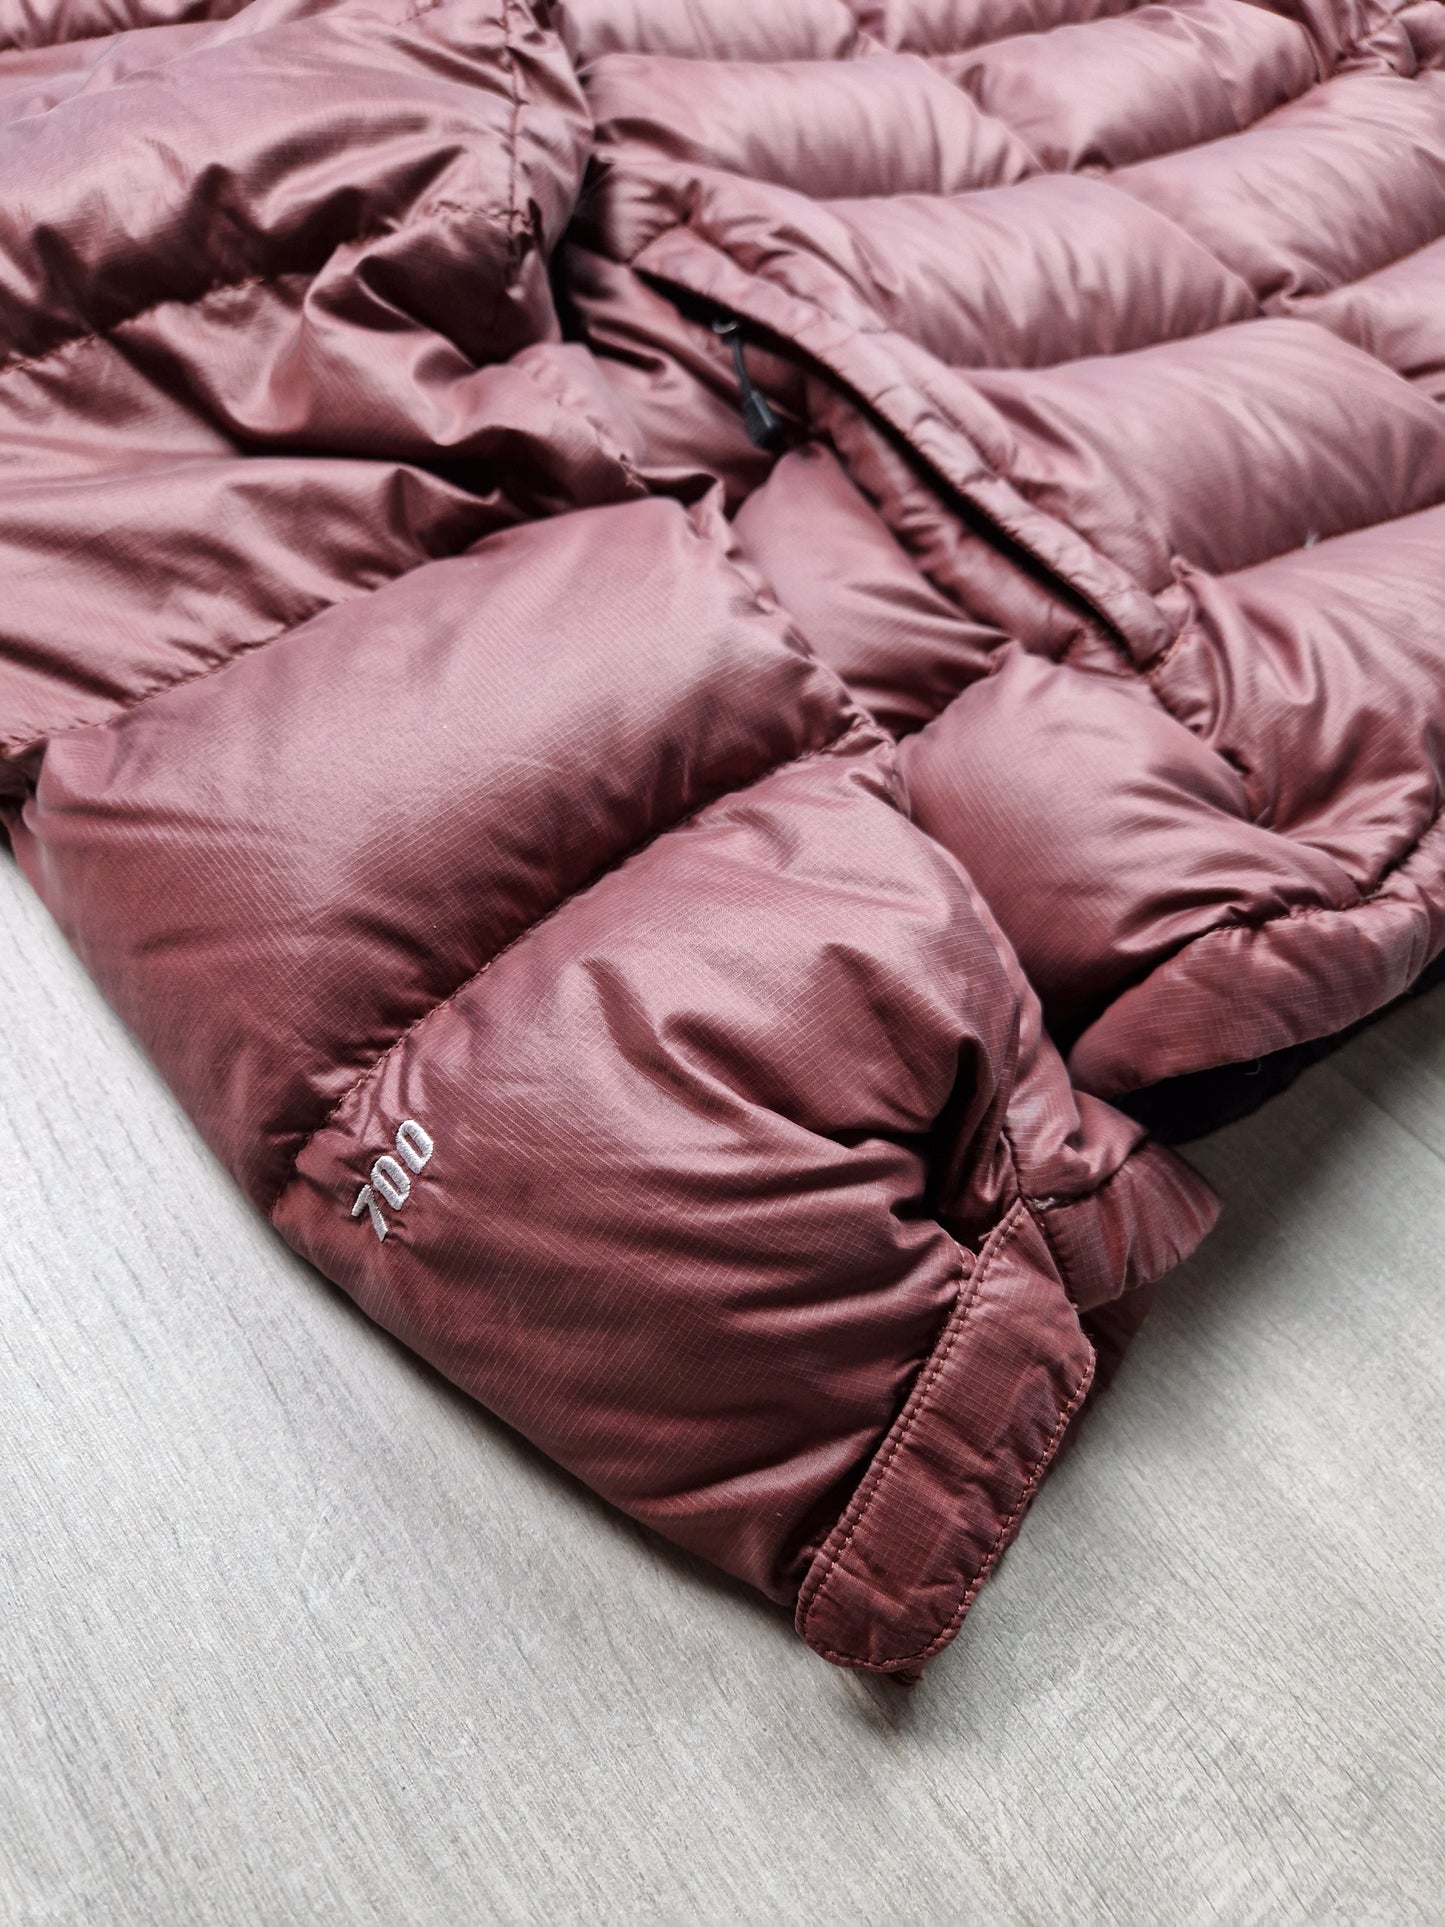 The North Face Nuptse 700 Puffer Jacket (L)